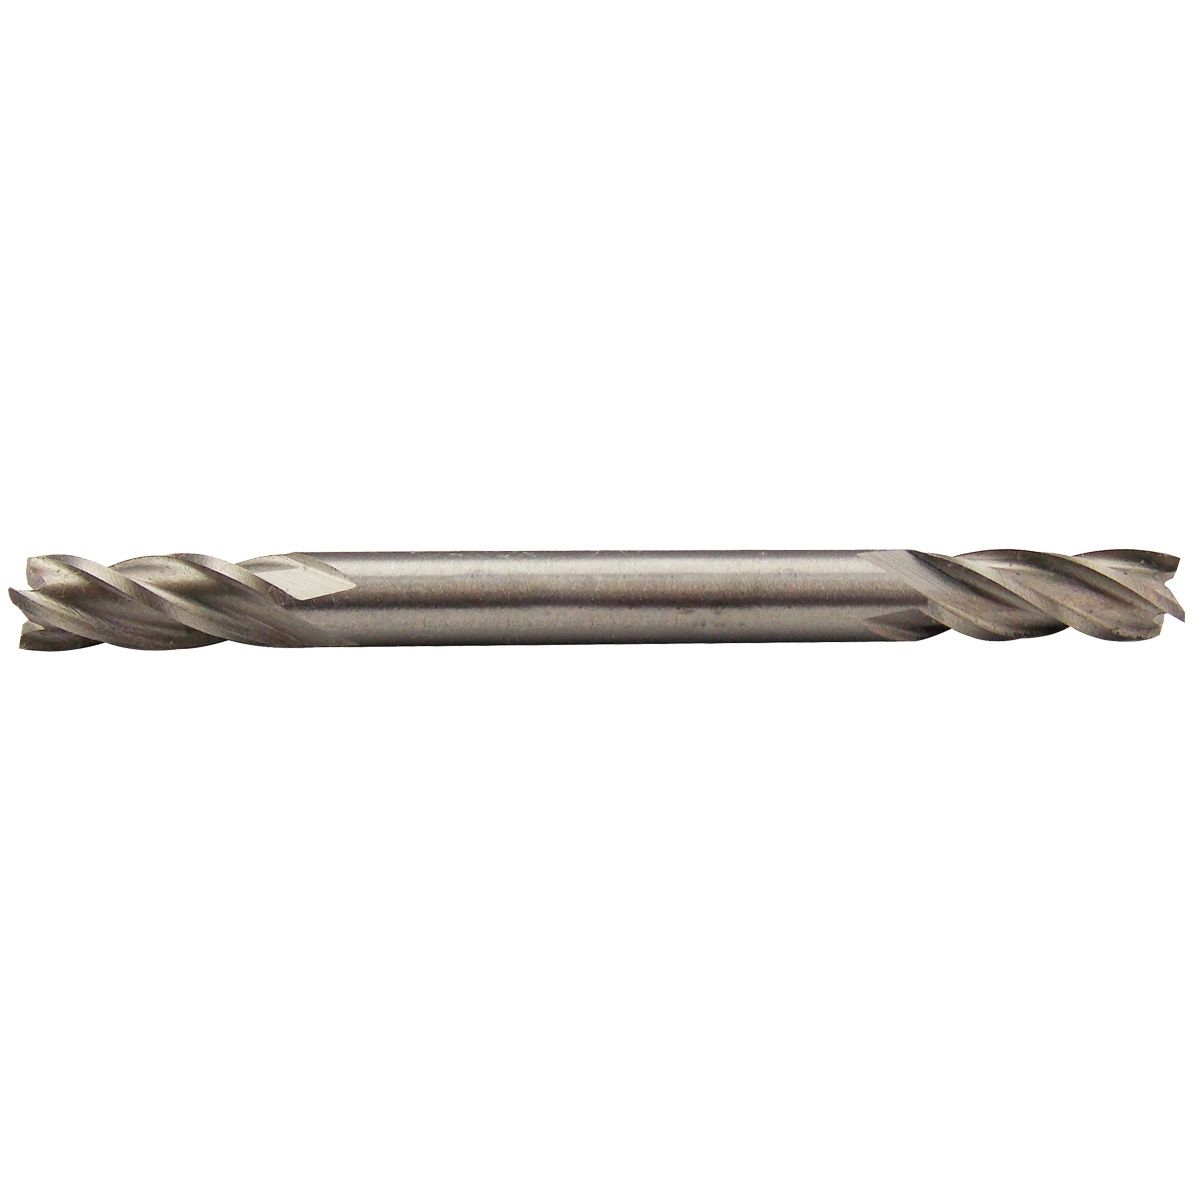 3/16" 4 FLUTE MINI HIGH SPEED STEEL DOUBLE END END MILL (5831-0034)